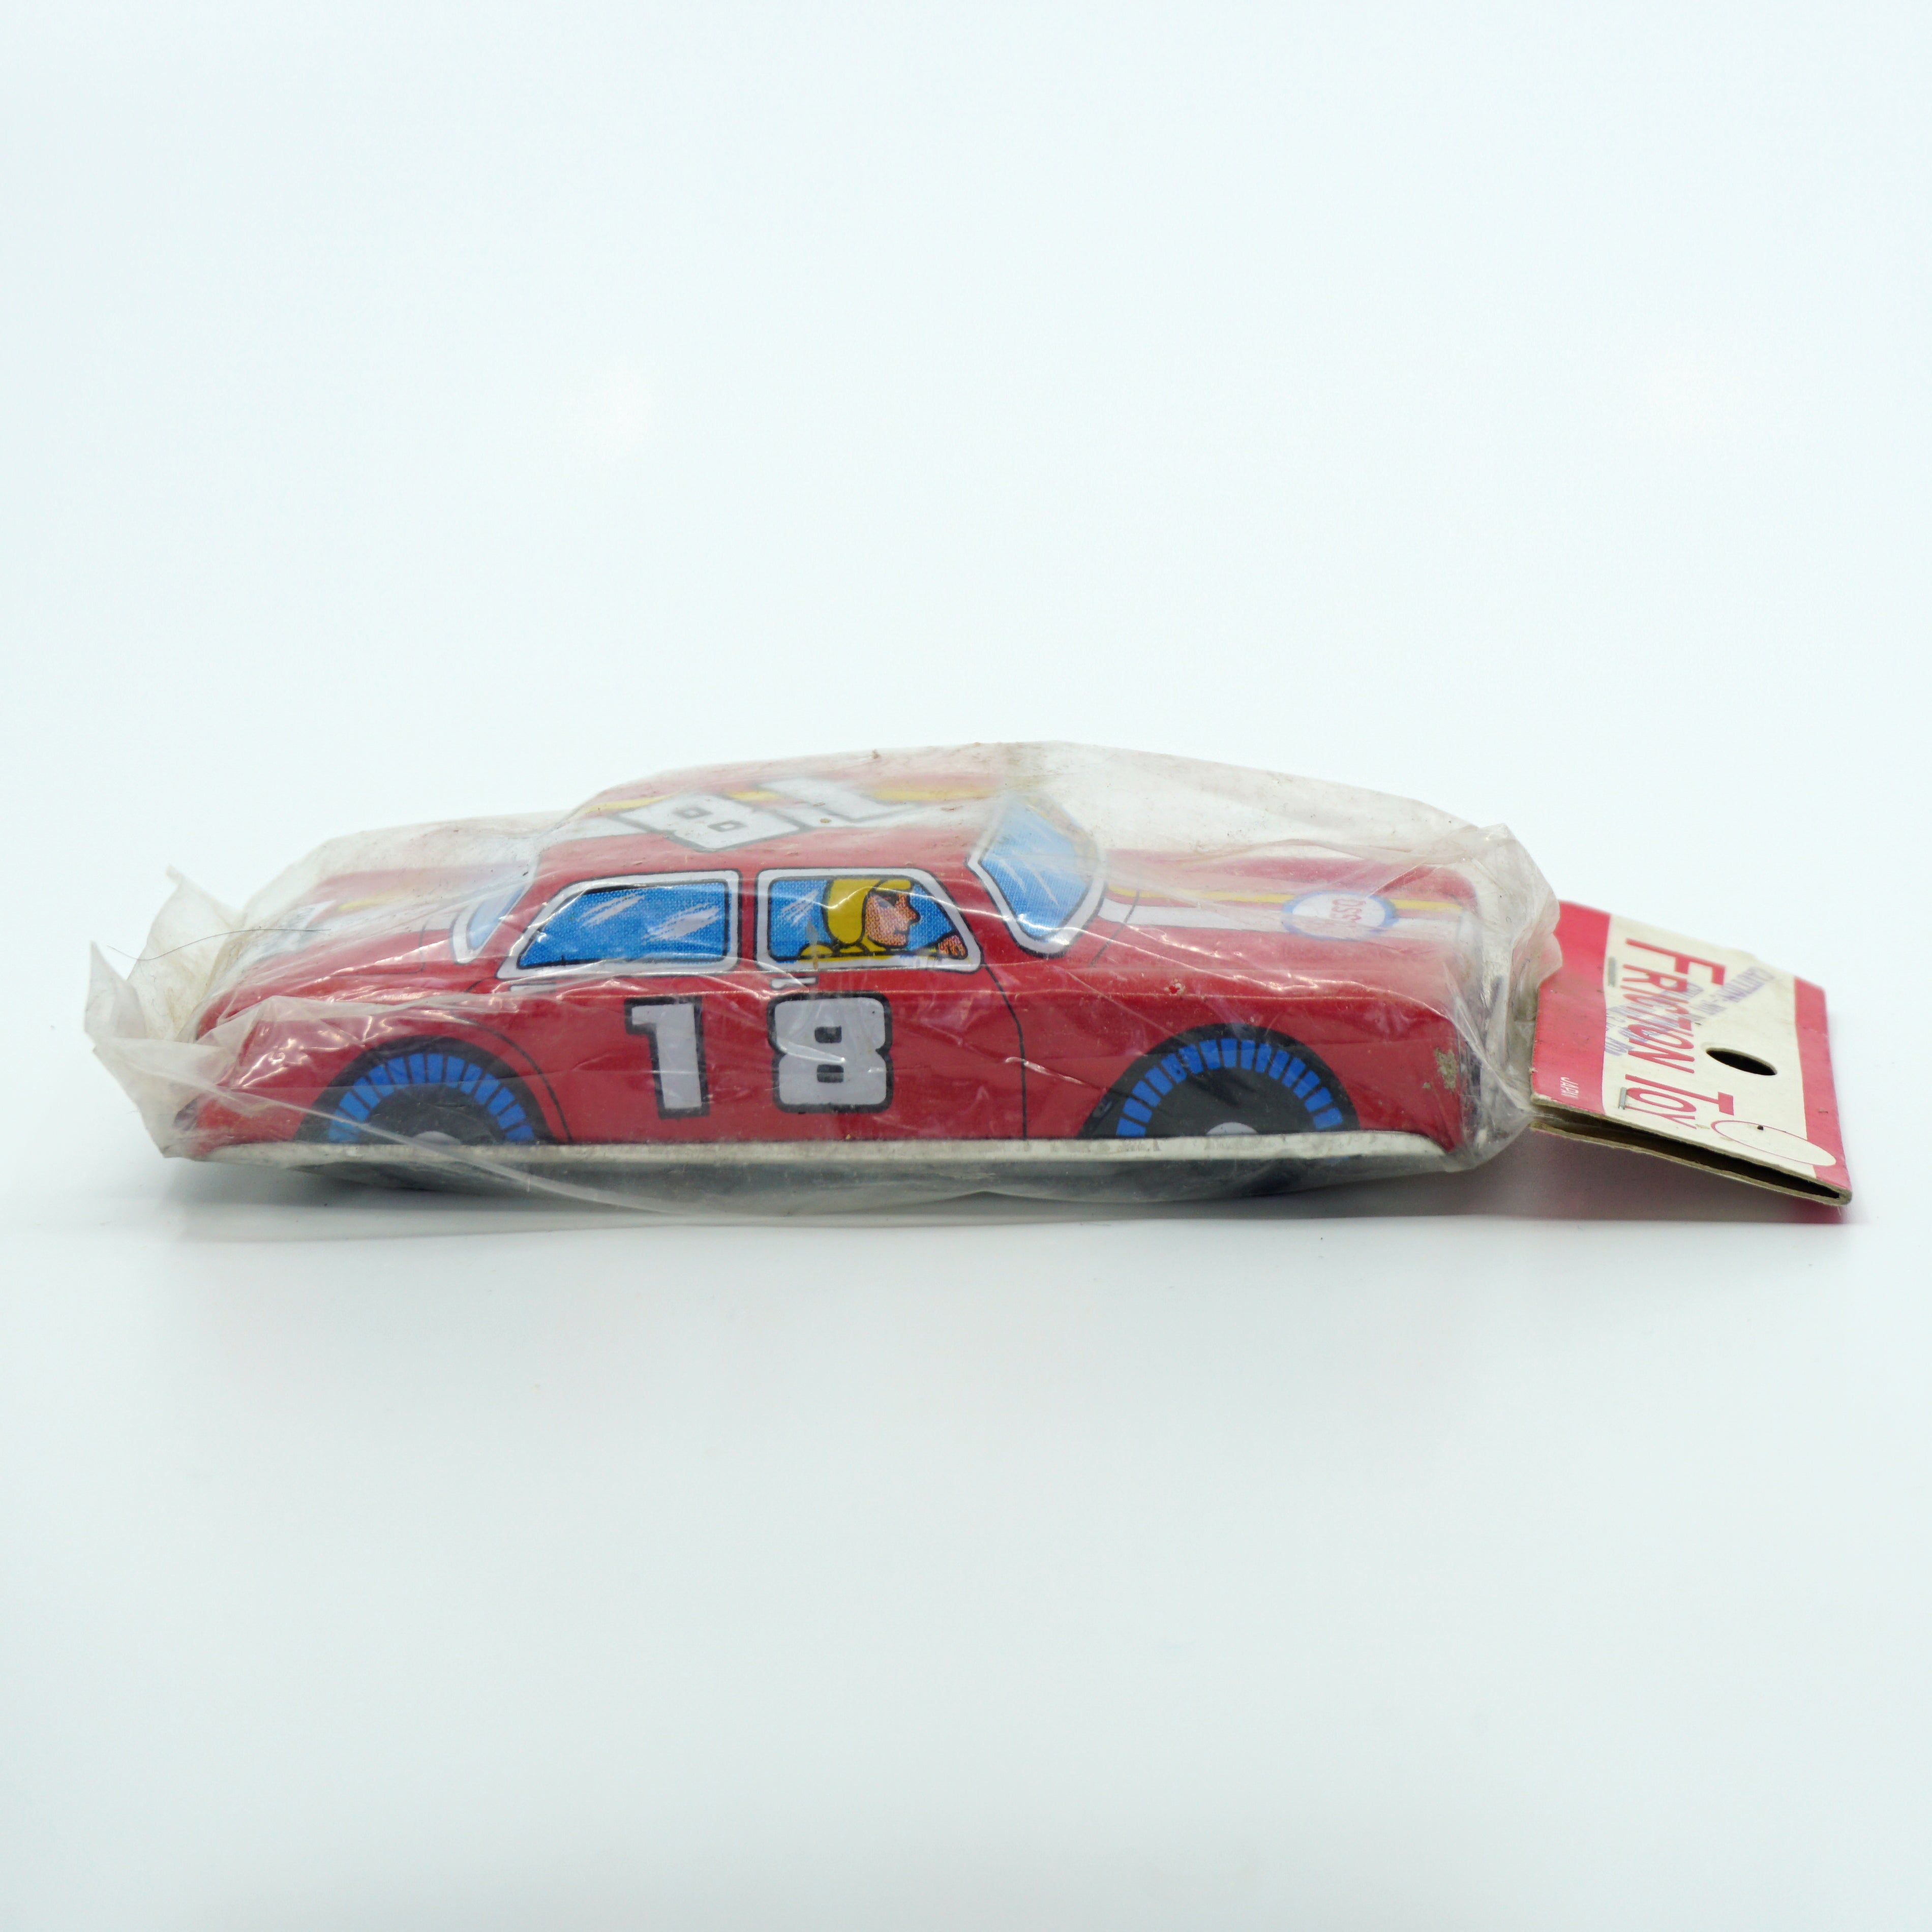 Collectible Vintage Mid-Century Esso Champion Friction Toy Car #18. Made in Japan.